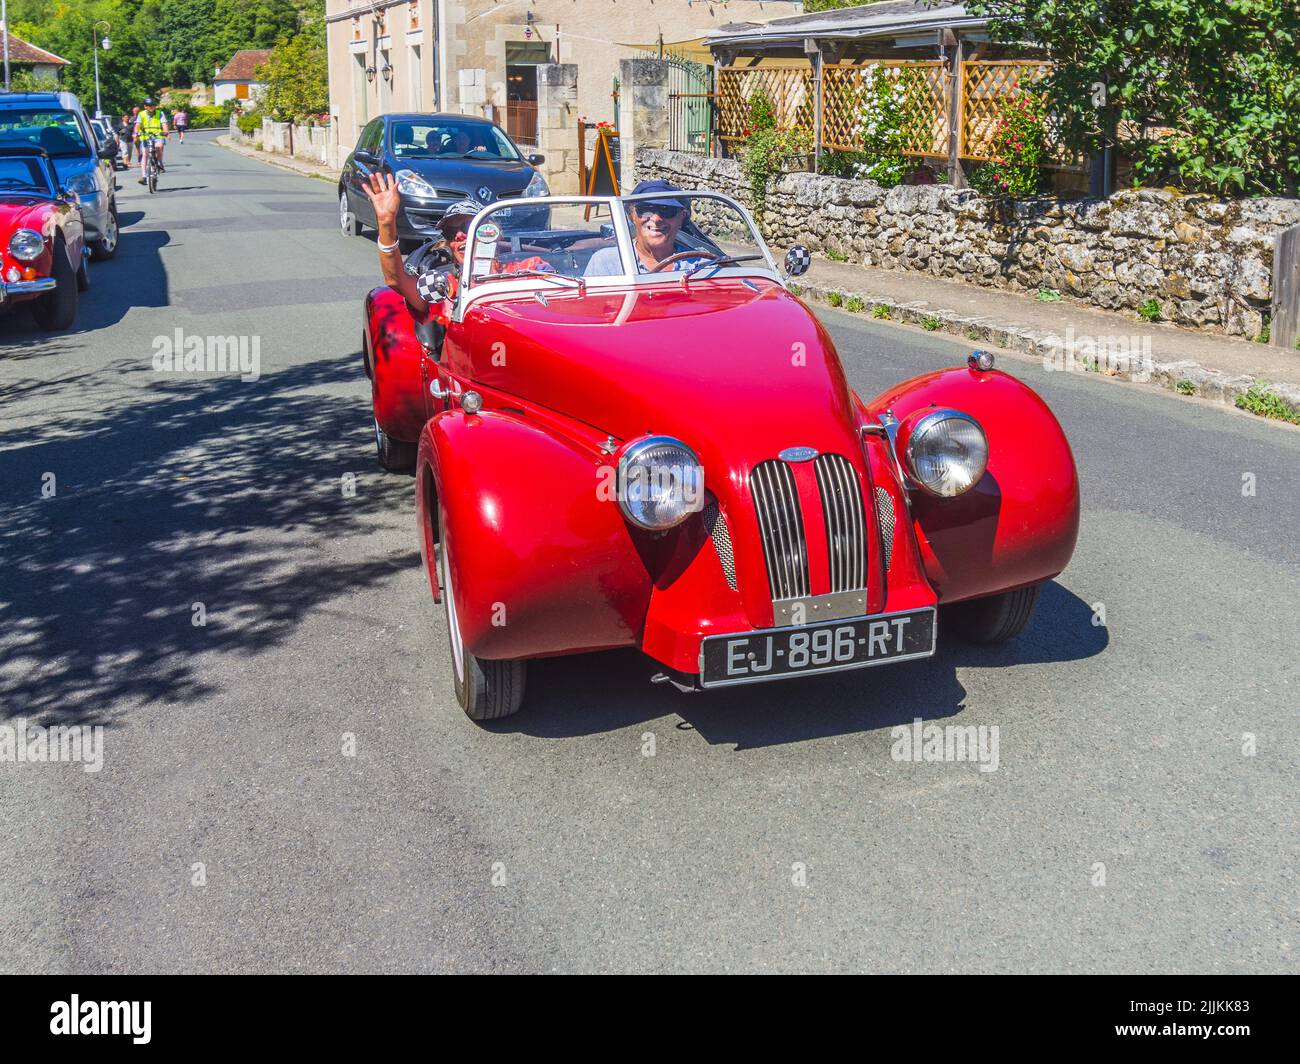 Dutch built Burton kit-car based on the Citroen 2CV chassis and engine, seen in Angles-sur-l'Anglin, Vienne (86), France. Stock Photo